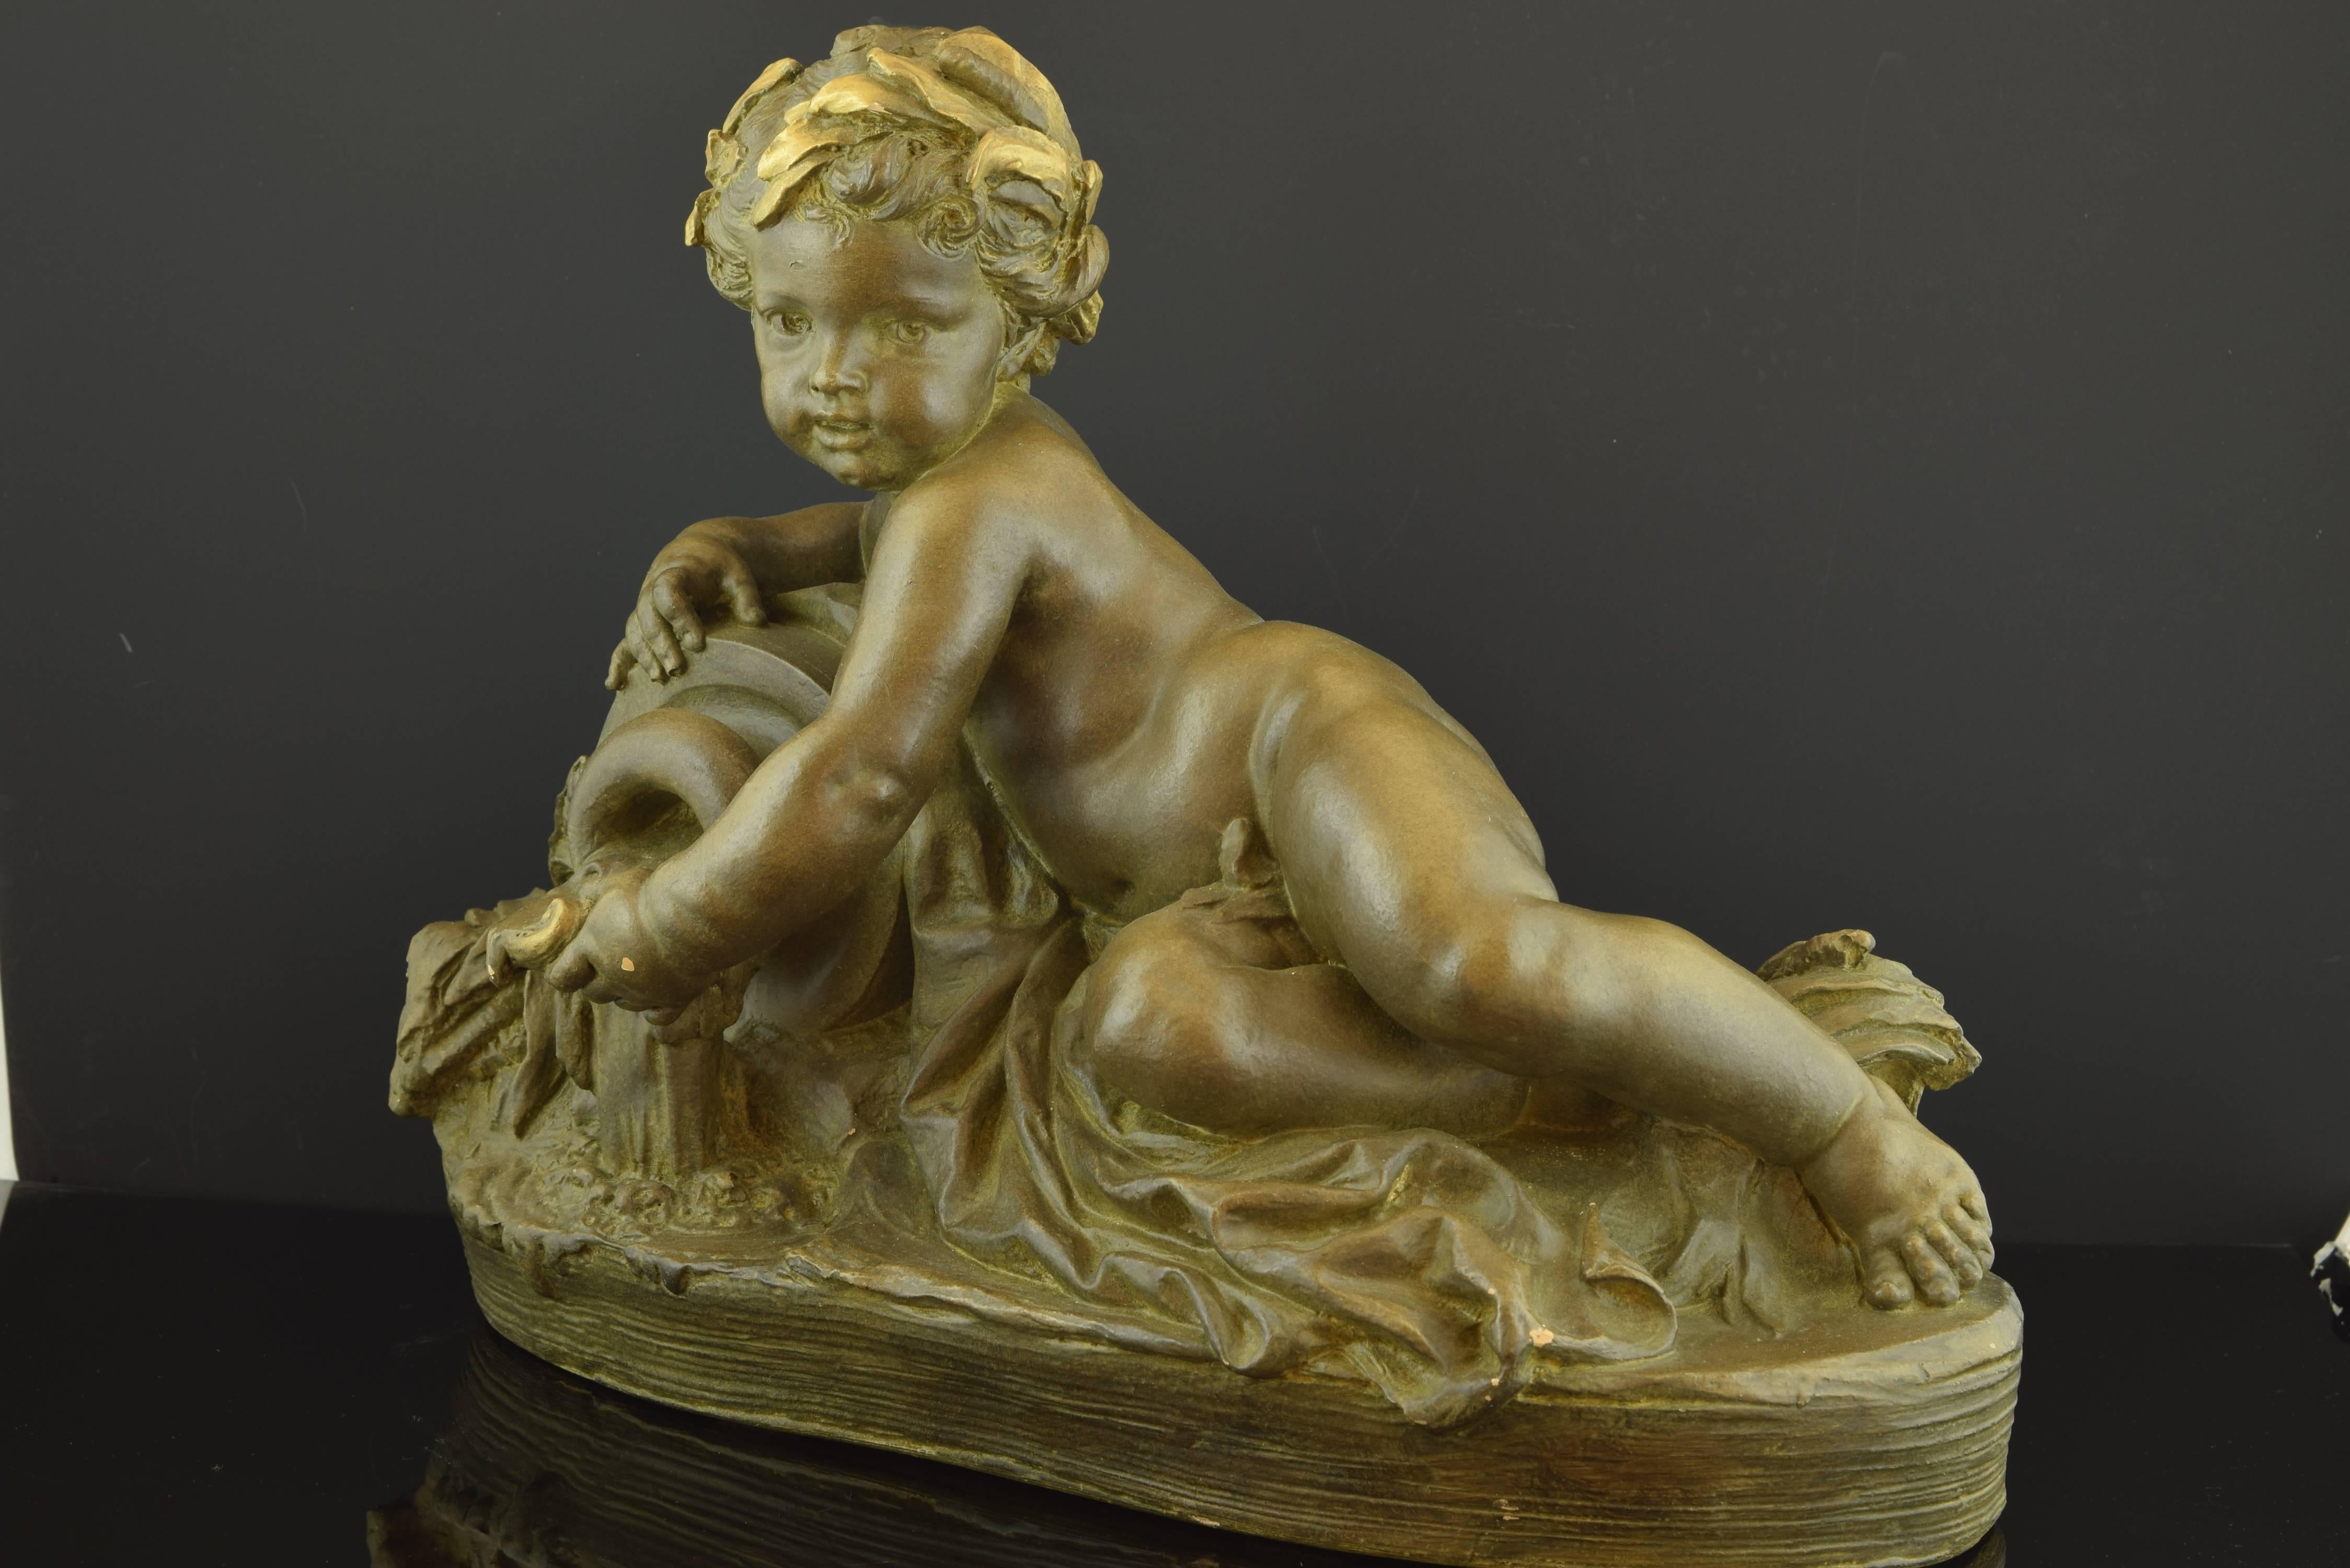 The fountain. Polychrome terracotta. 20th century, following models of CARRIER-BELLEUSE, AlbertErnest (Aisne, 1824-Sèvres, 1887). 
The figure shows a boy, lying down and almost totally naked, with his head enhanced by a golden leaf crown. It is